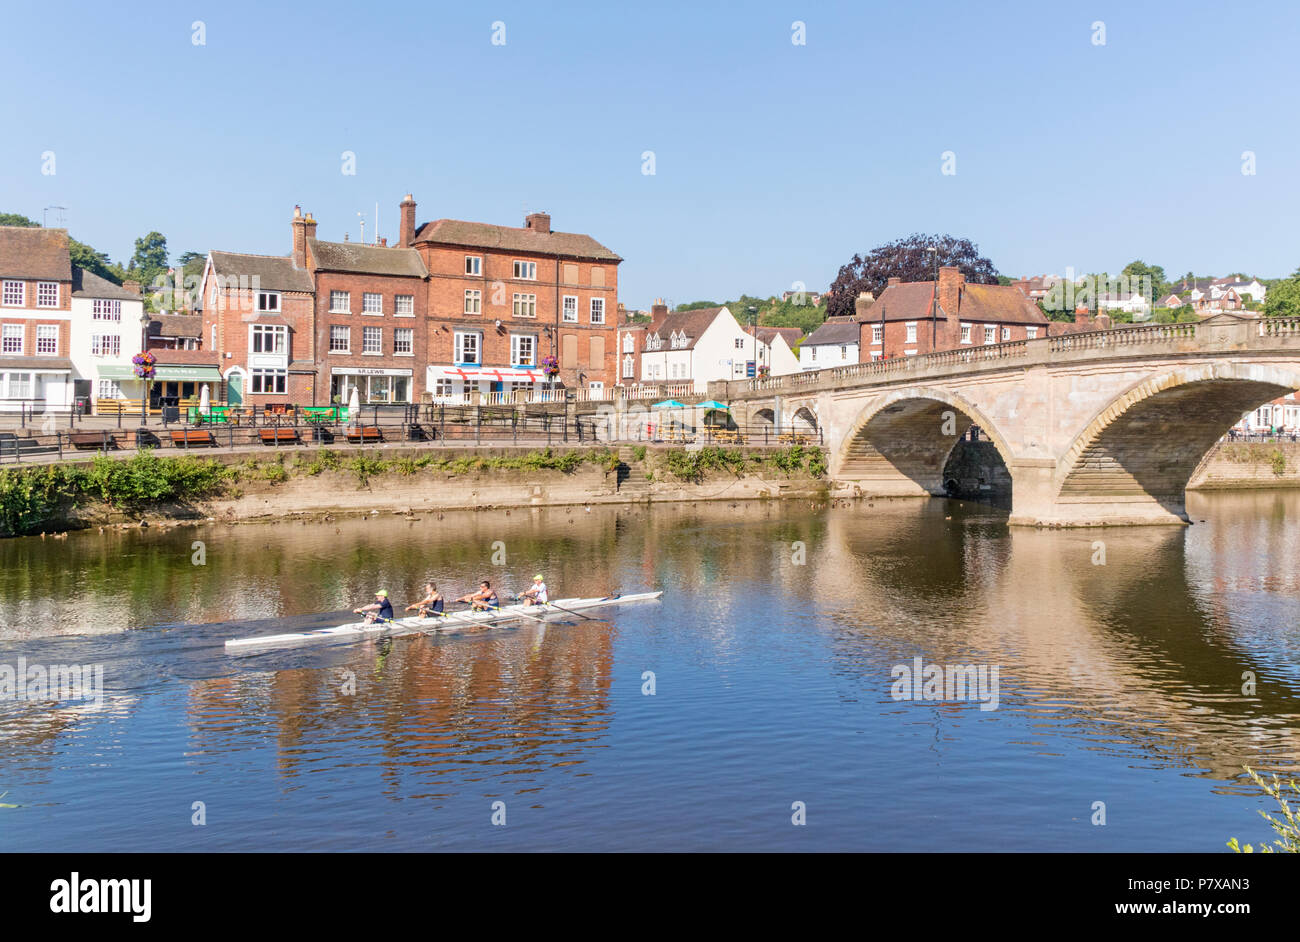 A Coxed eight rowing on the River Severn at Bewdley, Worcestershire, England, UK Stock Photo